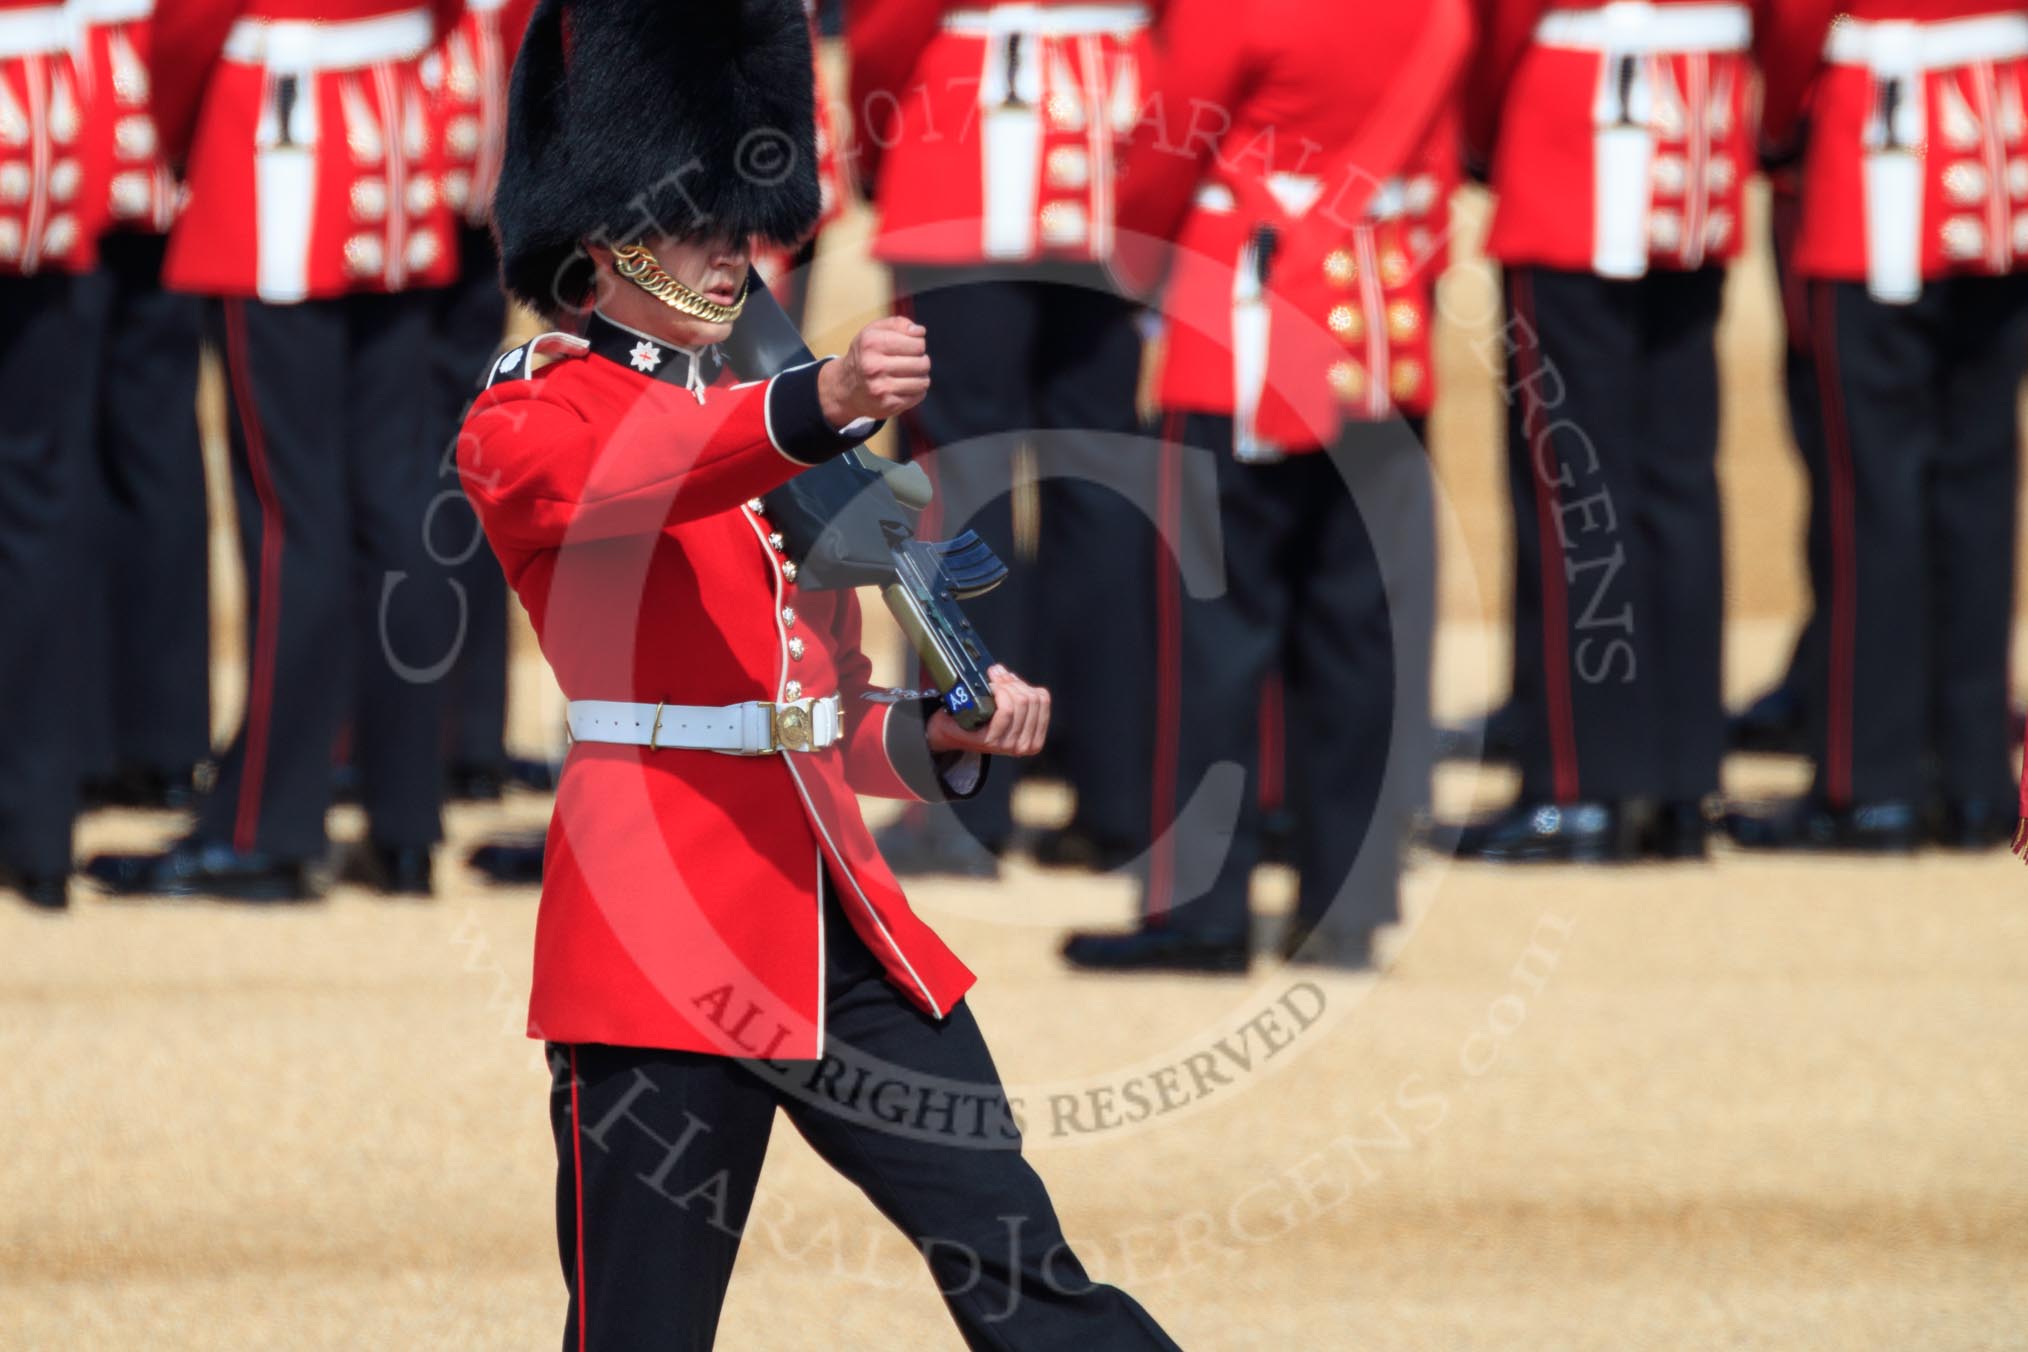 The Colour Sentry Guardsman Jonathon Hughes (26) patrolling the uncased Colour during Trooping the Colour 2018, The Queen's Birthday Parade at Horse Guards Parade, Westminster, London, 9 June 2018, 10:34.